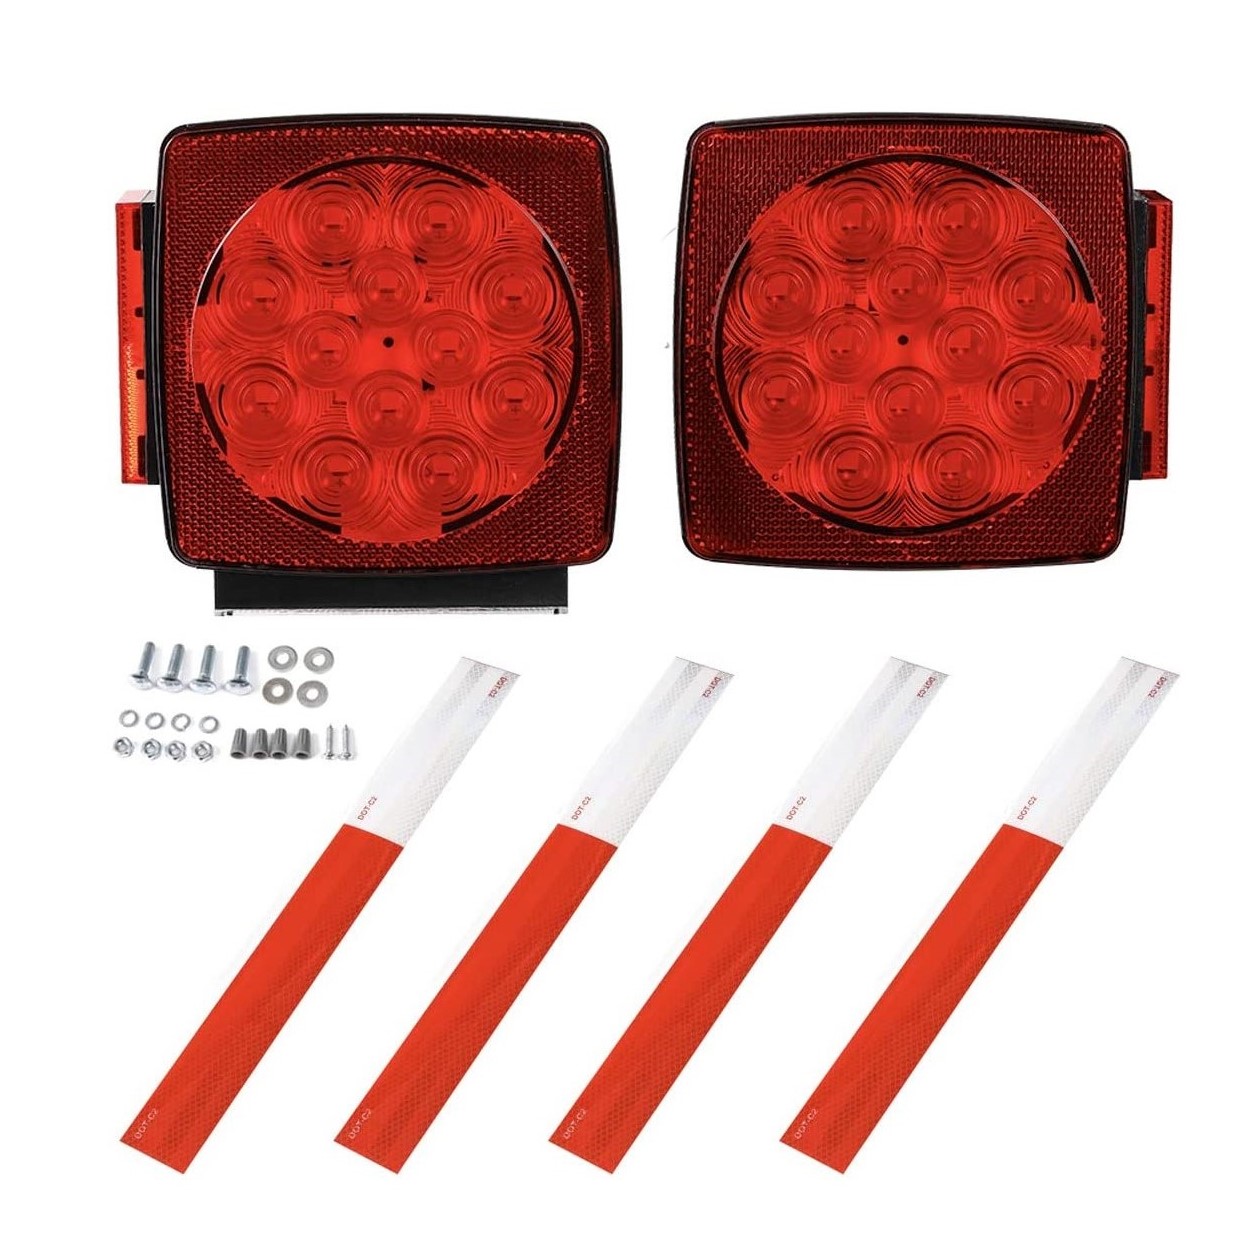 101001F 12V LED Submersible Left and Right Trailer Lights With Reflective Strips Featured Image